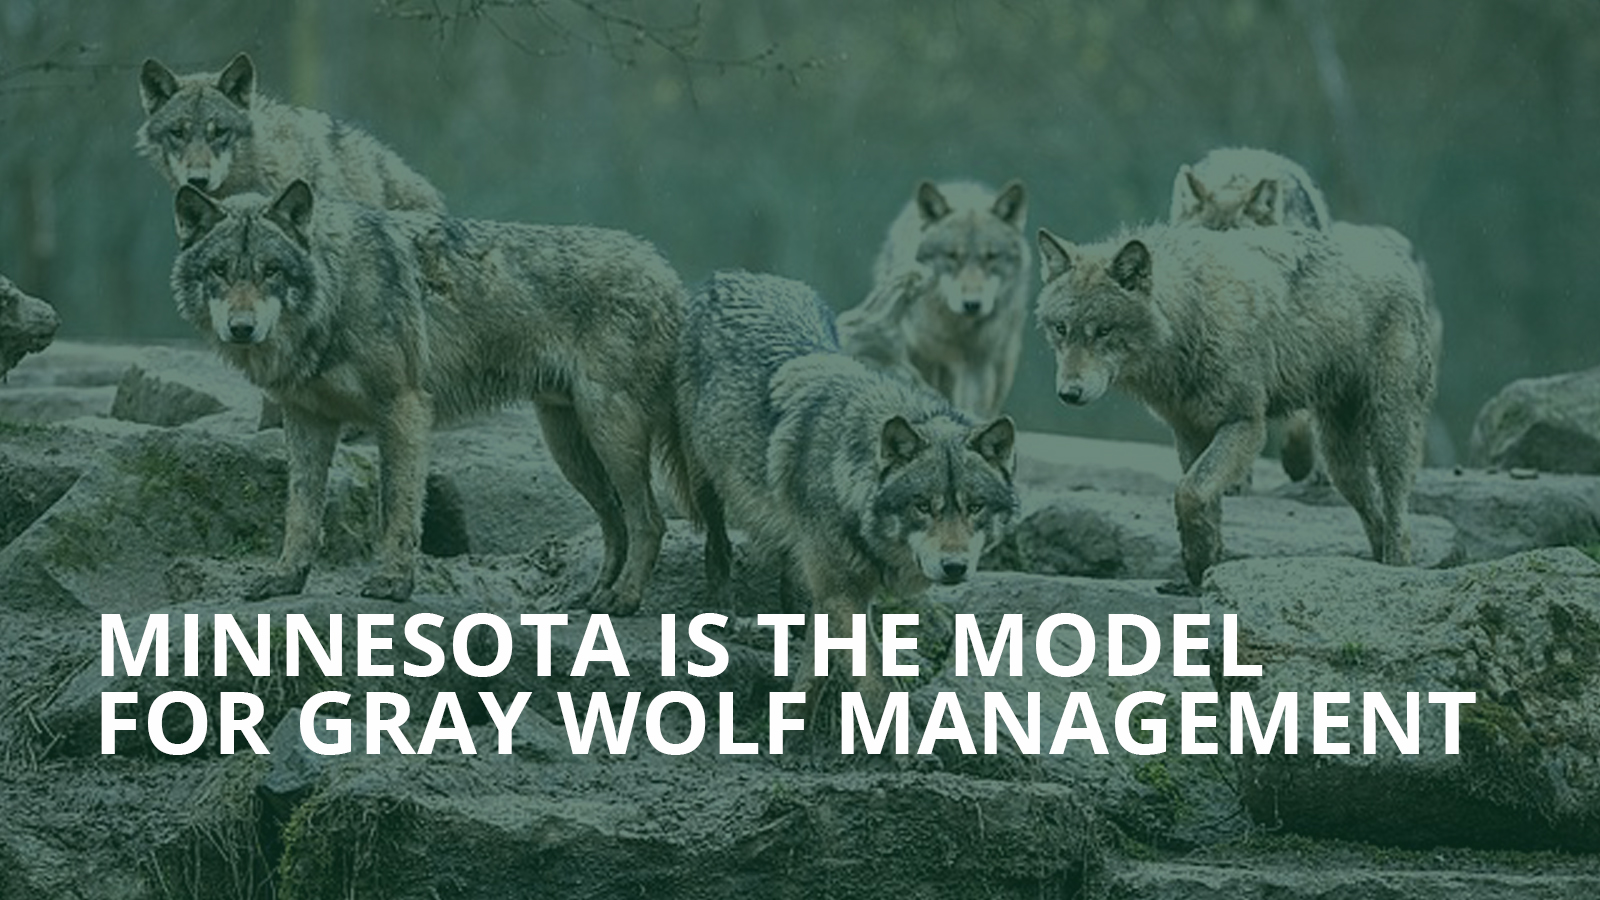 BRANDED: Minnesota is the model for gray wolf management